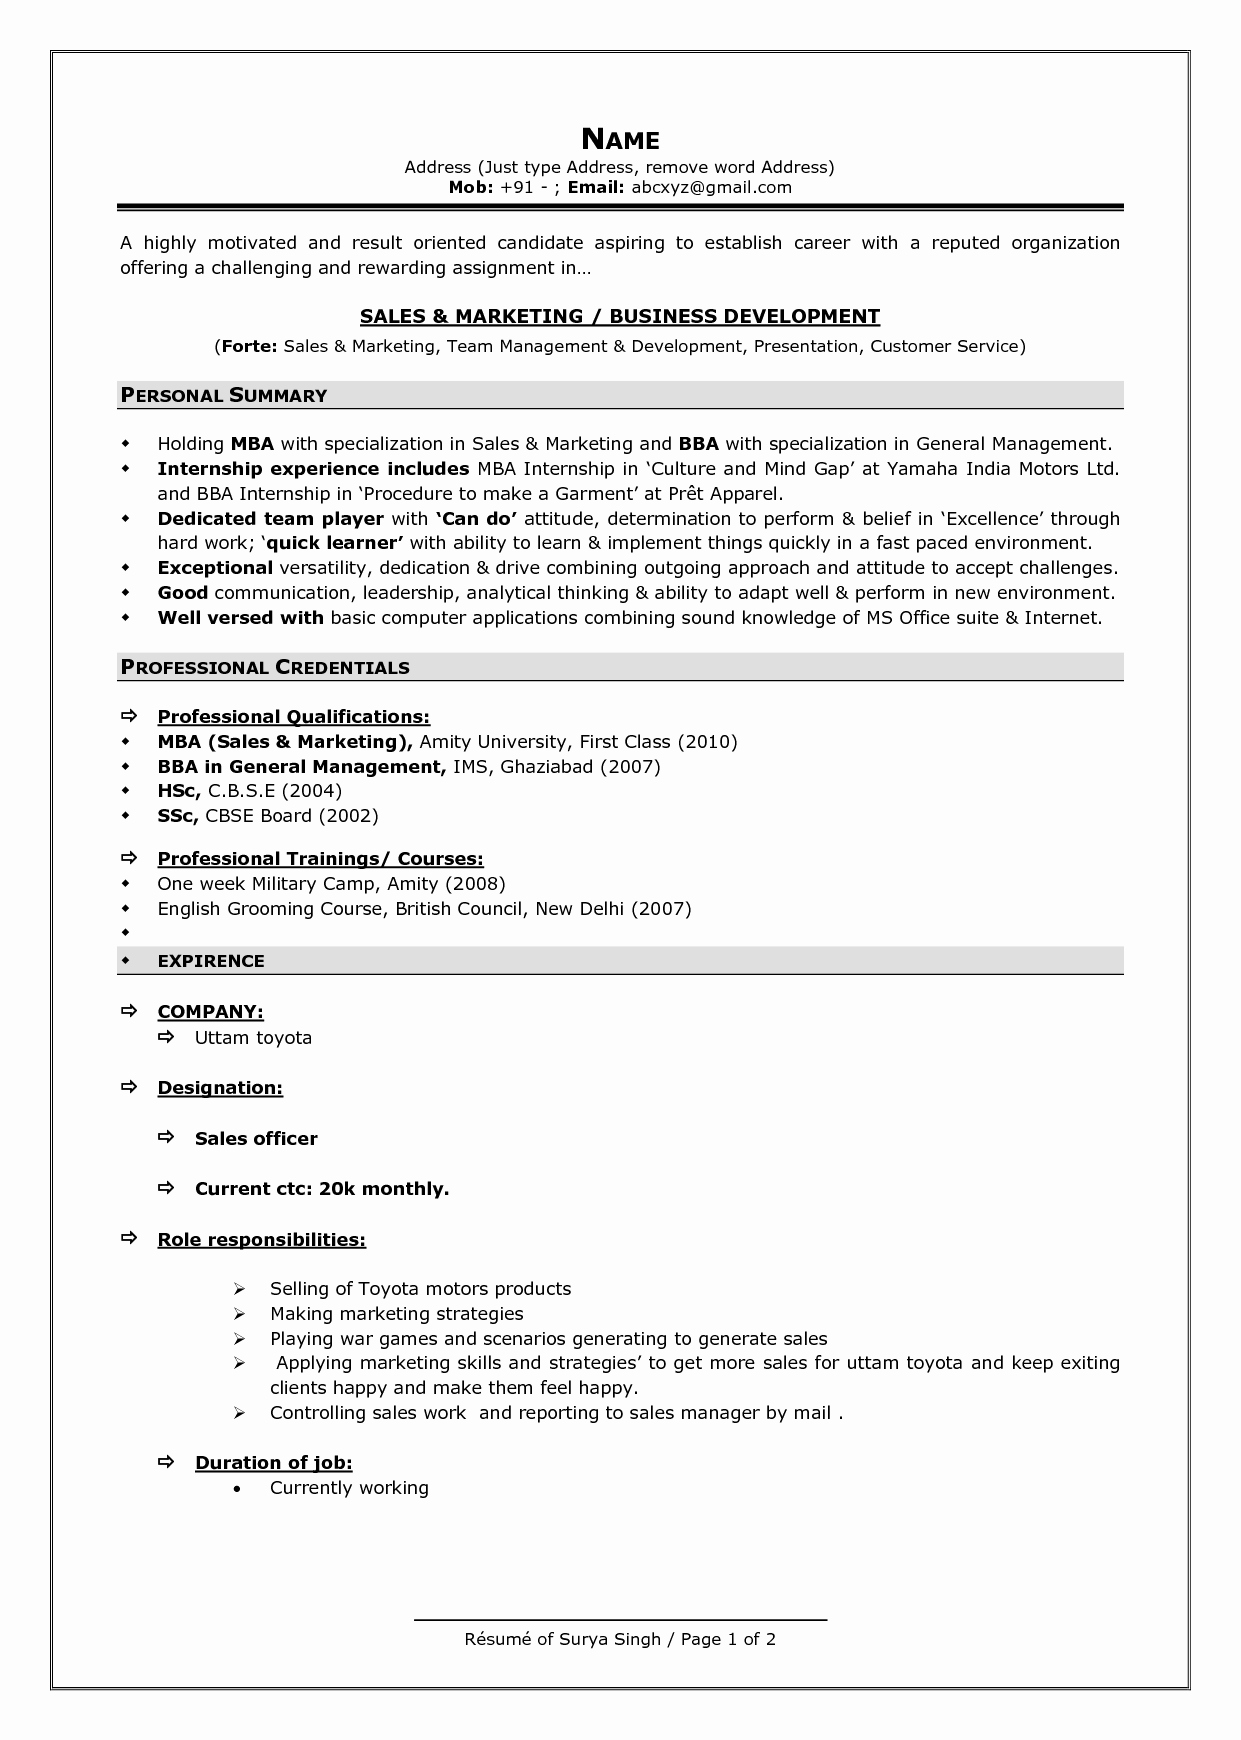 Resume format Template